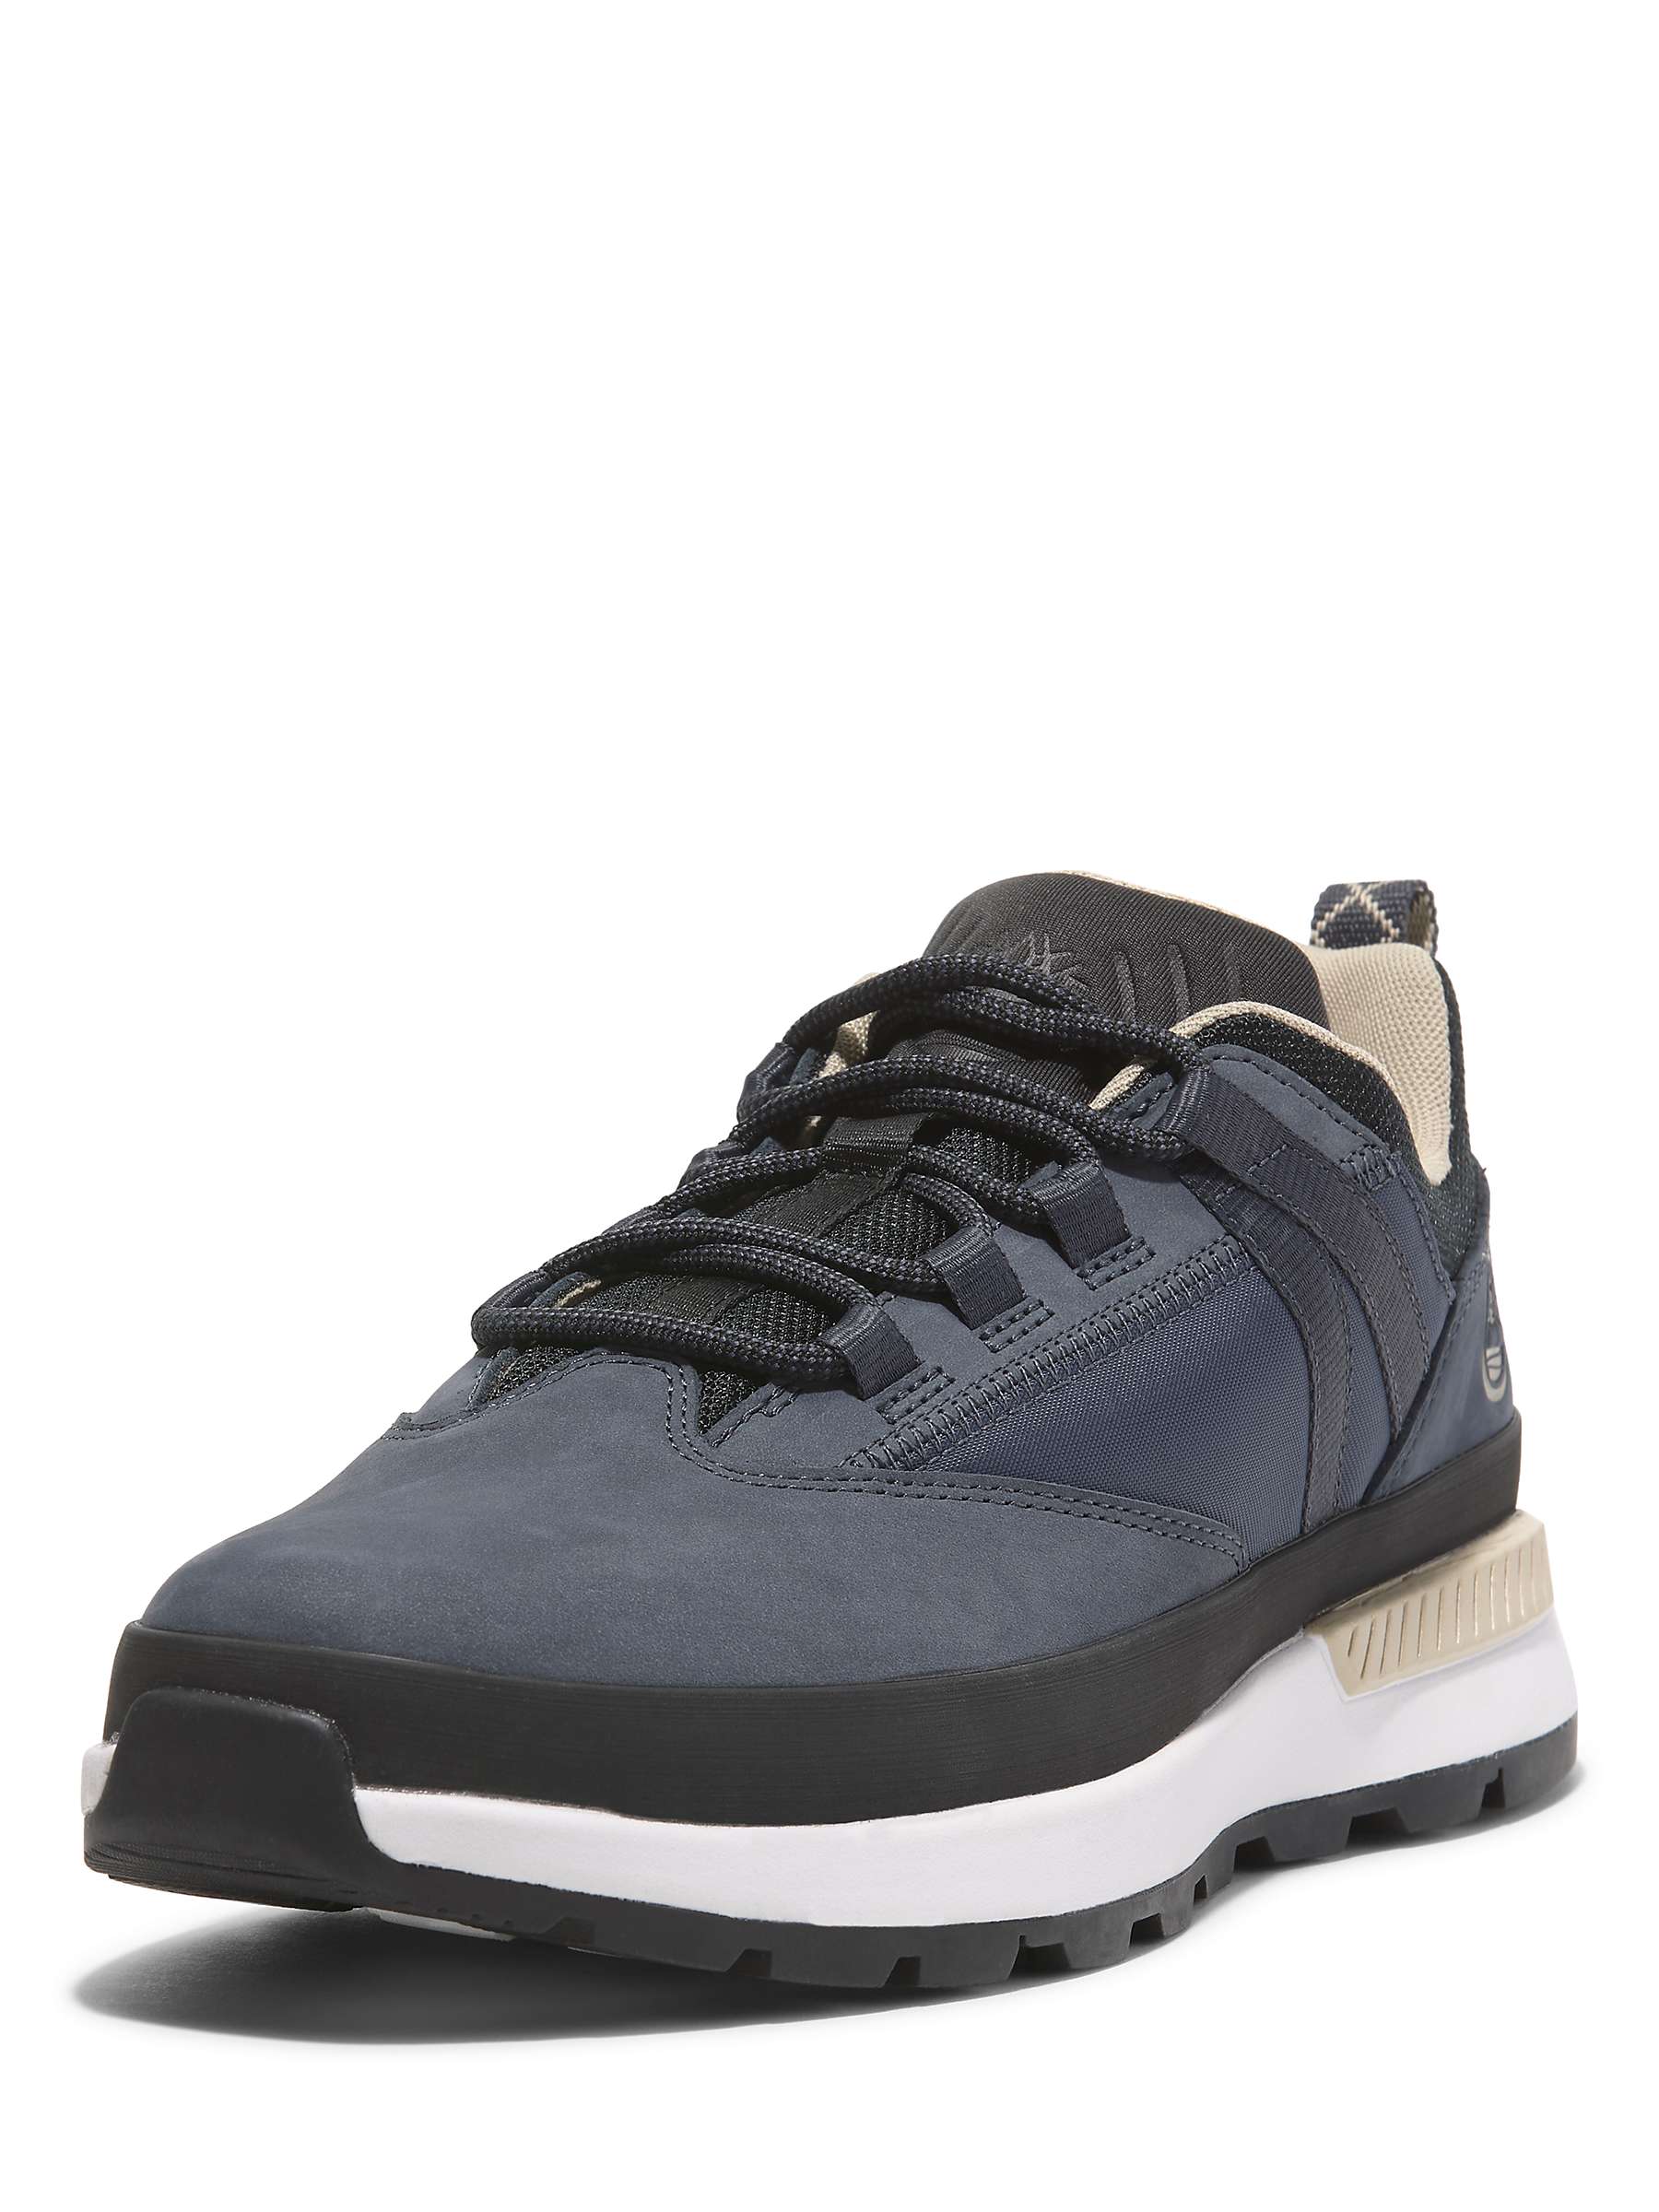 Buy Timberland Winsor Trail Men's Trainers Online at johnlewis.com